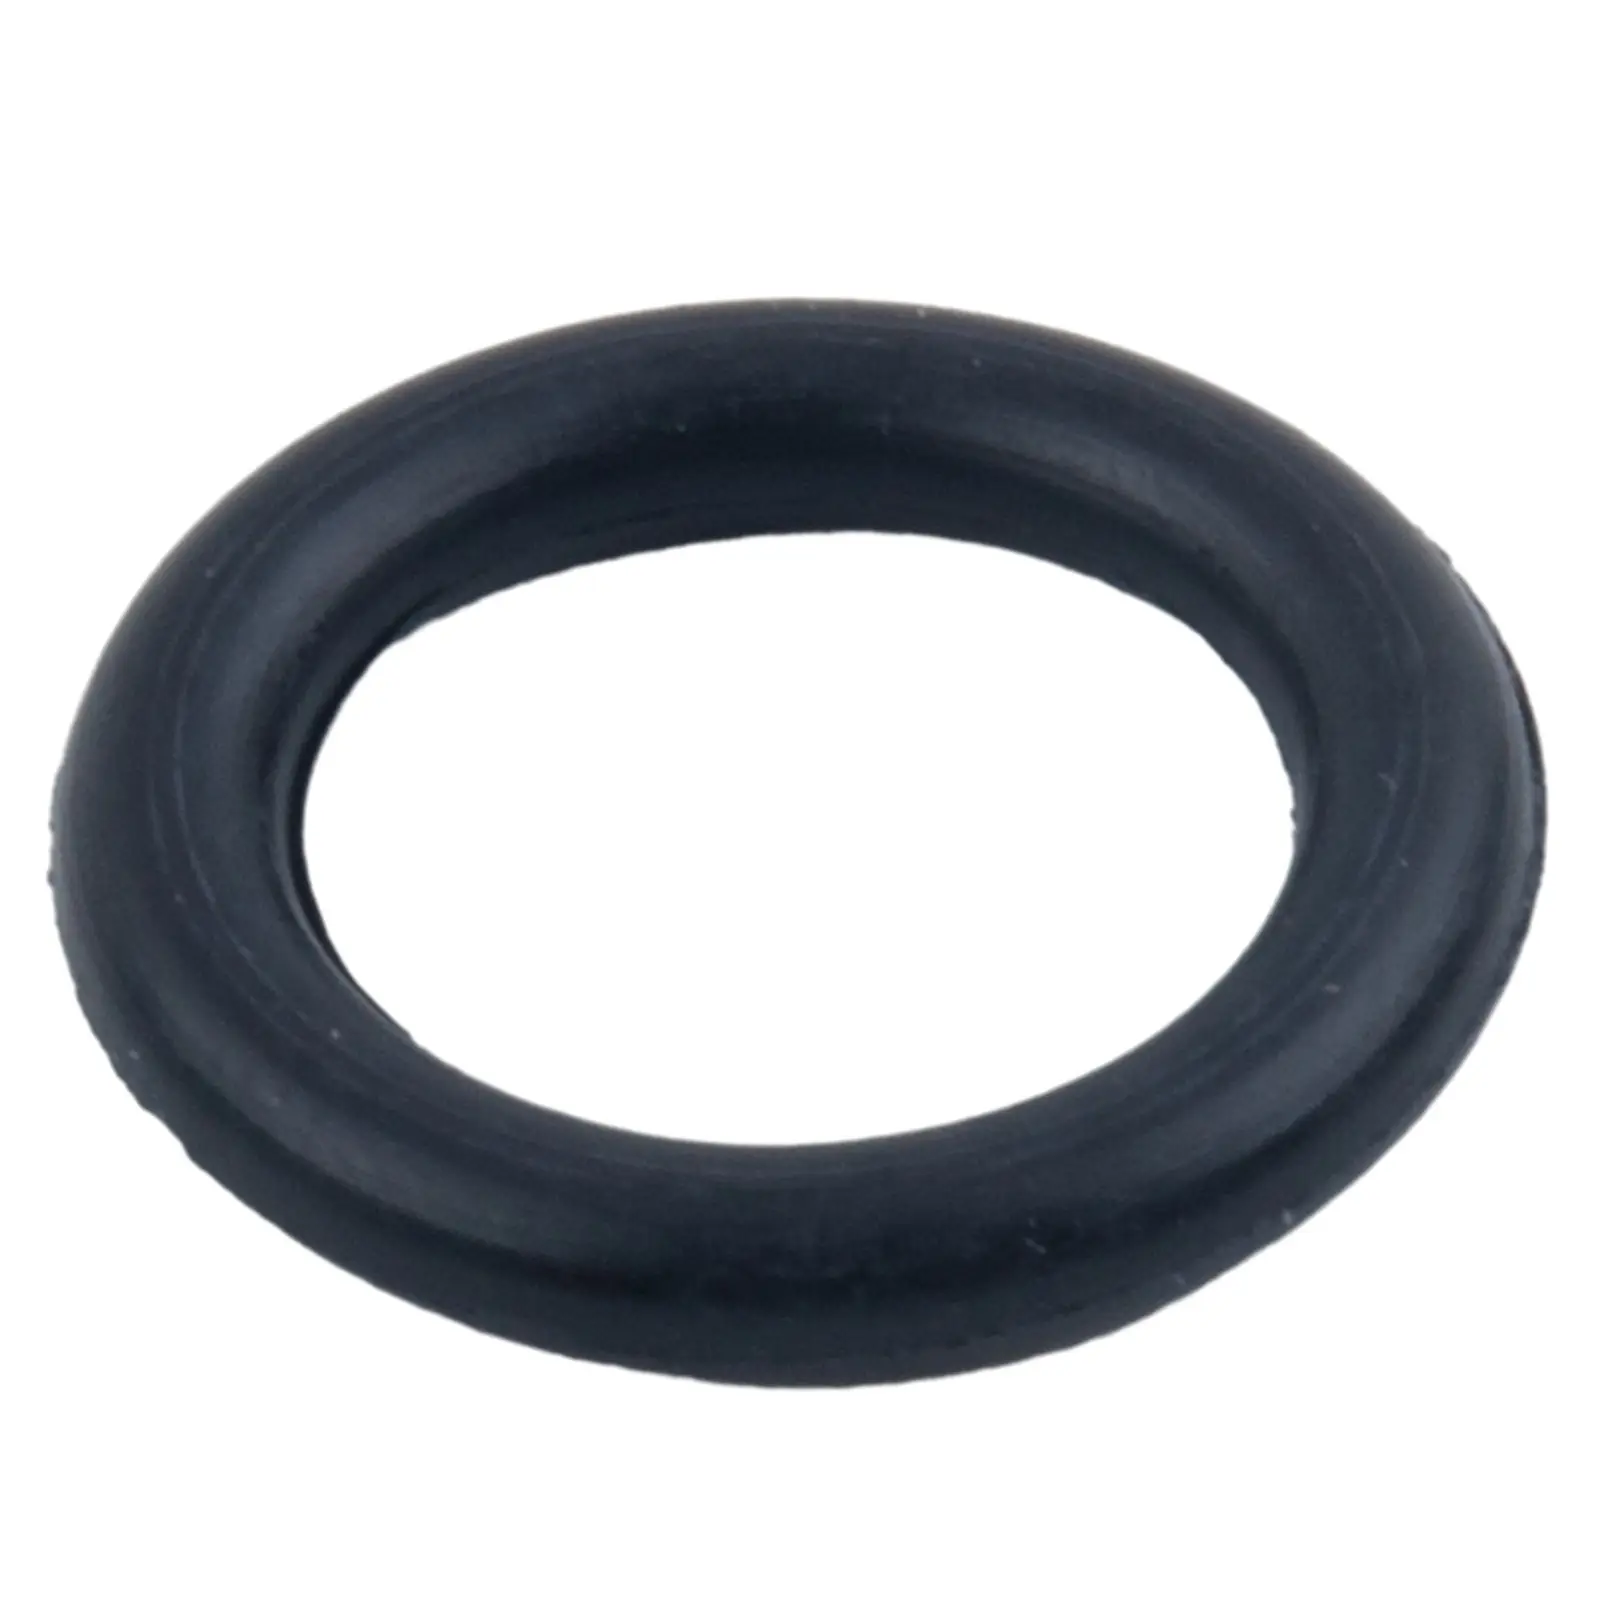 

40Pcs 3/8 O-Rings For Pressure Washer Hose Quick Disconnect Garden Irrigation Tool Accessories Replacement O-Ring